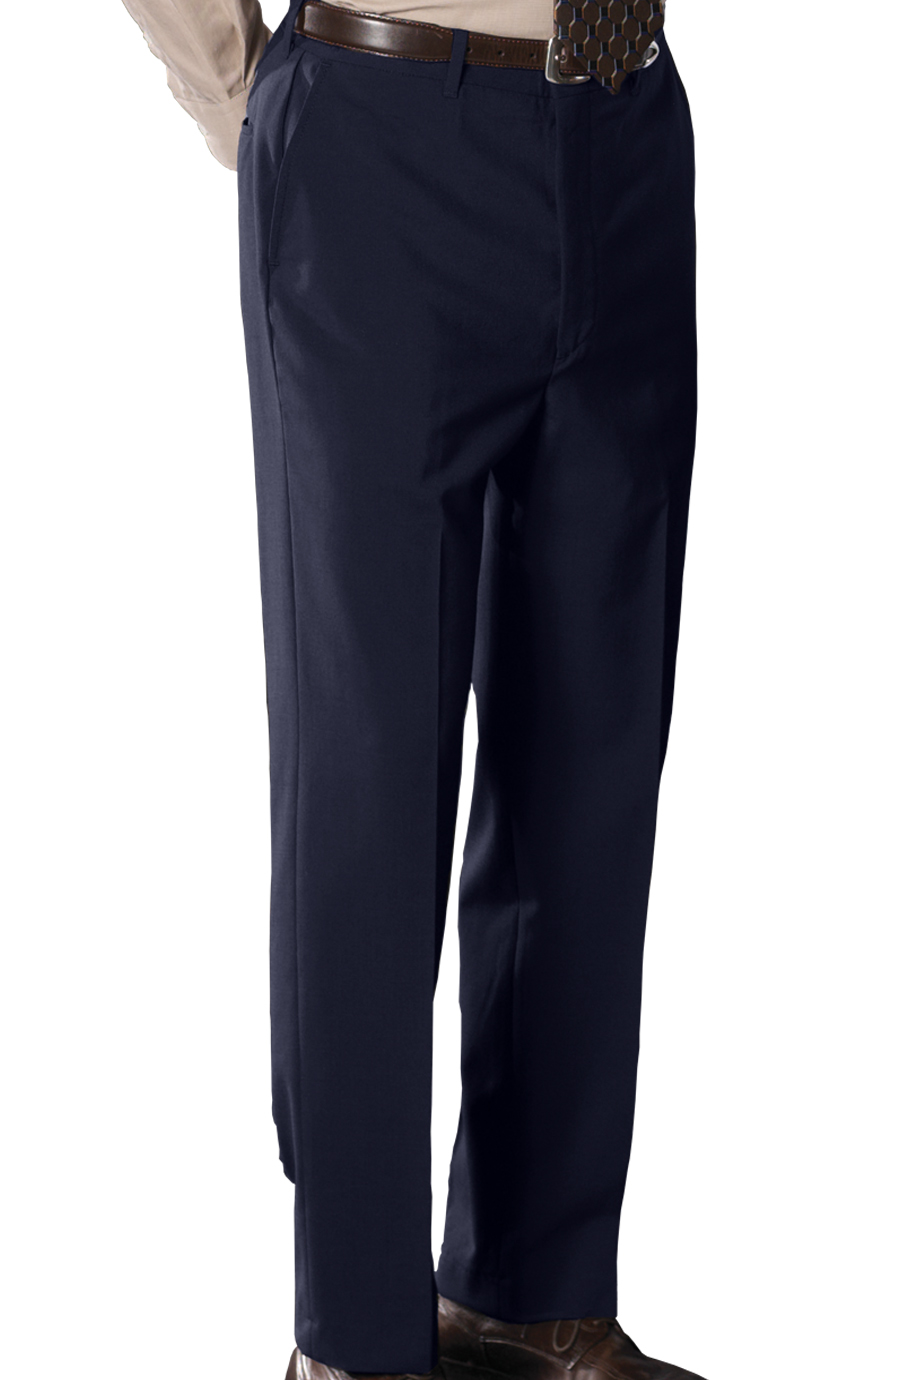 Edwards Big & Tall  Wool Blend Flat Front Dress Pant - Online exclusive